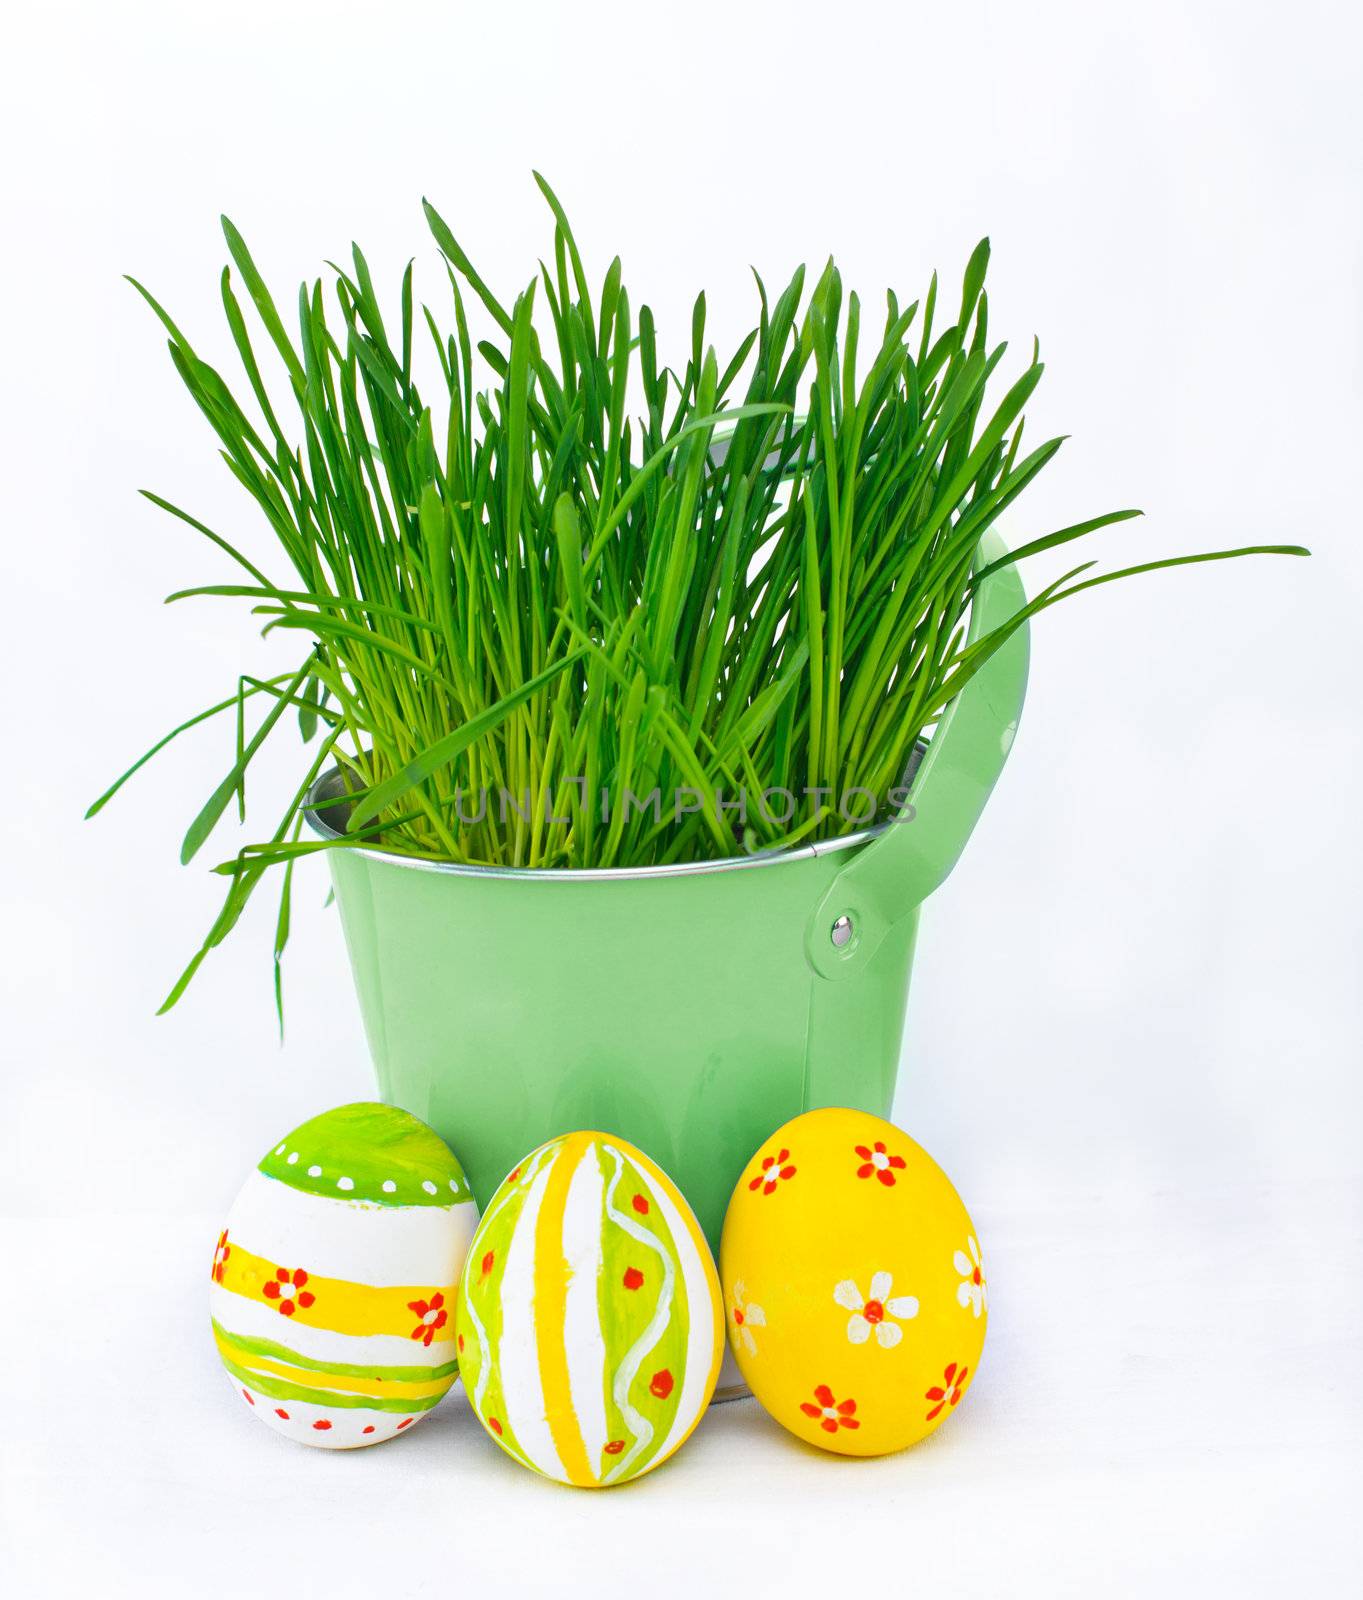 Easter eggs next to the bucket with the green spring grass